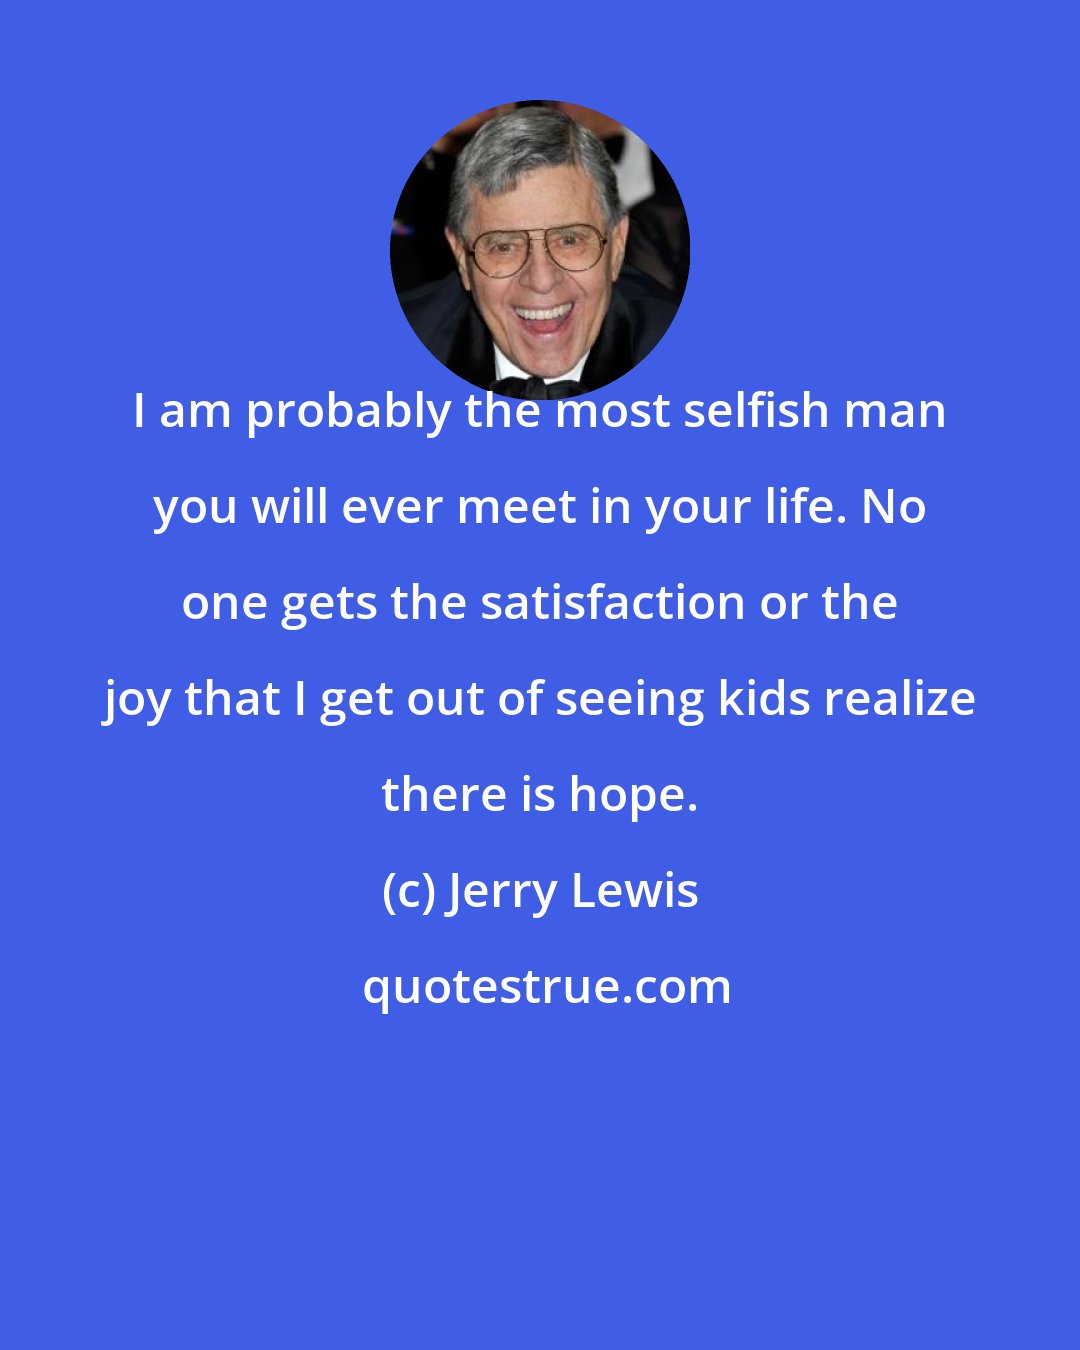 Jerry Lewis: I am probably the most selfish man you will ever meet in your life. No one gets the satisfaction or the joy that I get out of seeing kids realize there is hope.